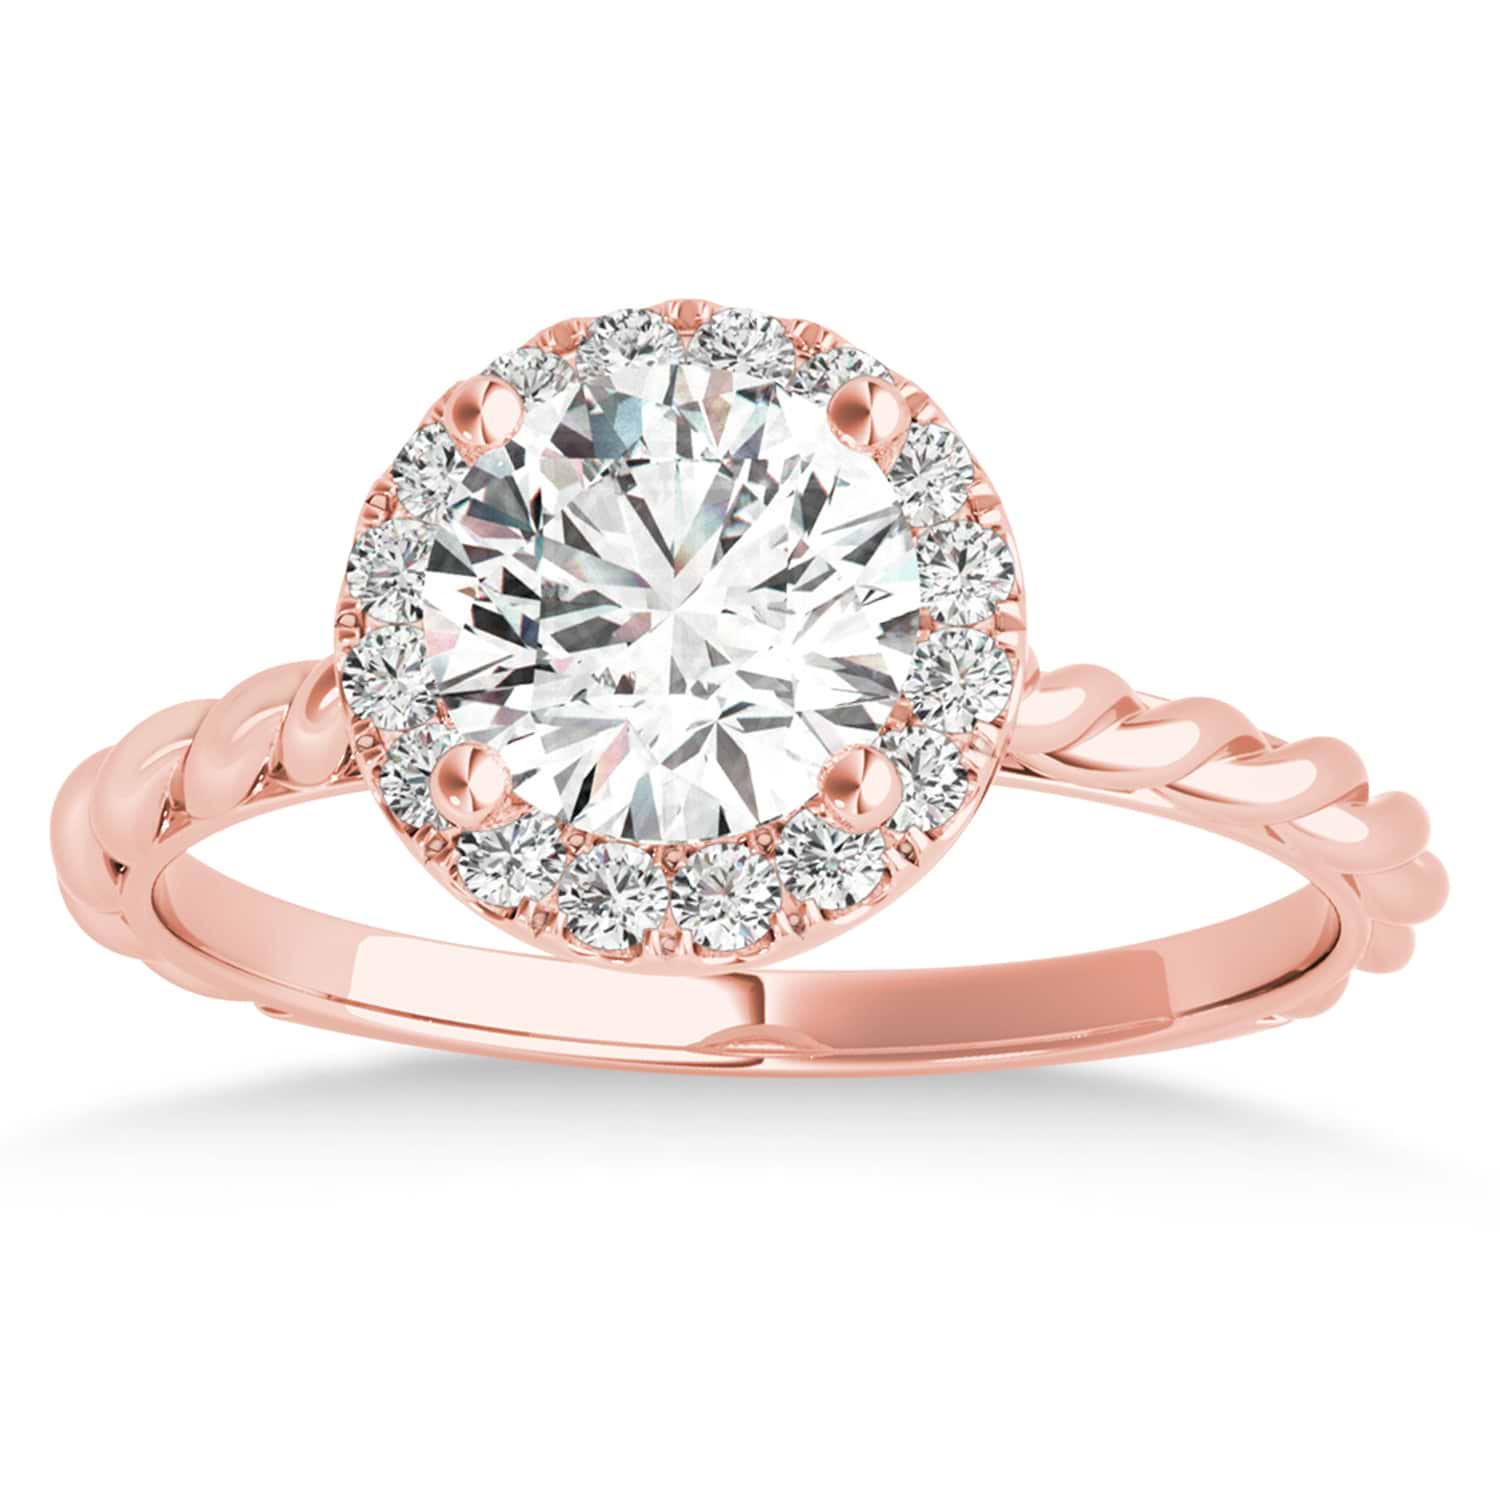 Diamond Halo Twisted Rope Engagement Ring in 14k Rose Gold (0.10ct)